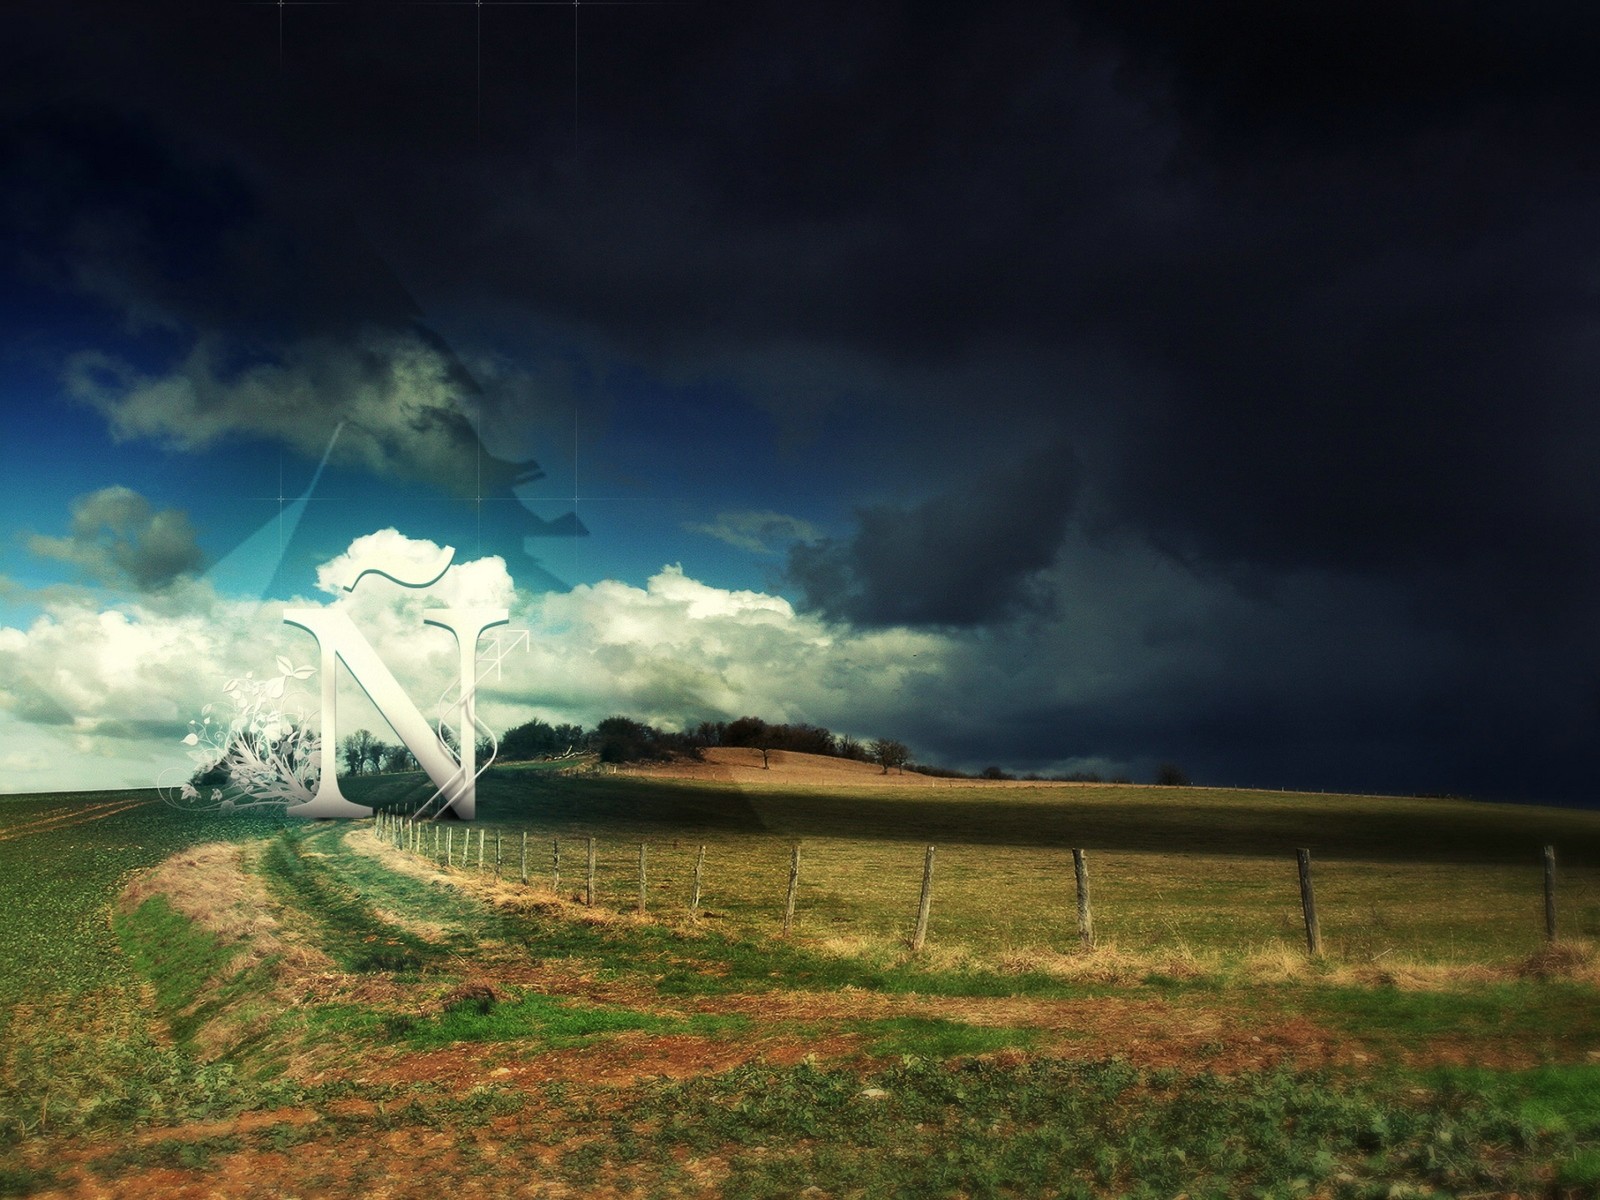 General 1600x1200 nature abstract digital art landscape clouds sky field fence outdoors